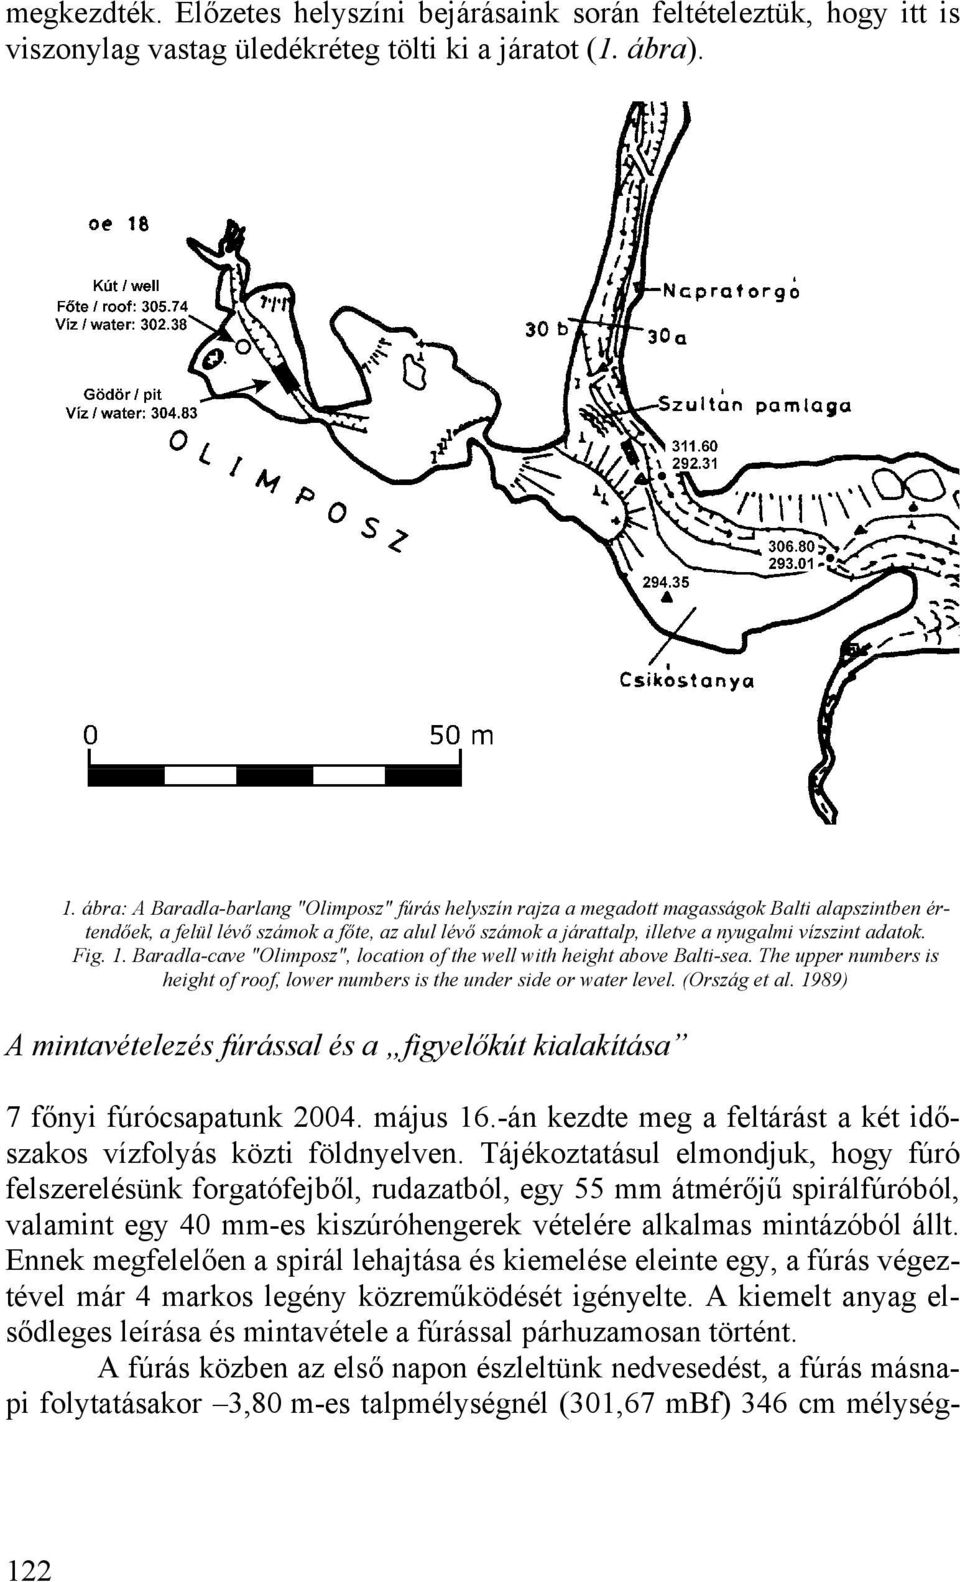 adatok. Fig. 1. Baradla-cave "Olimposz", location of the well with height above Balti-sea. The upper numbers is height of roof, lower numbers is the under side or water level. (Ország et al.